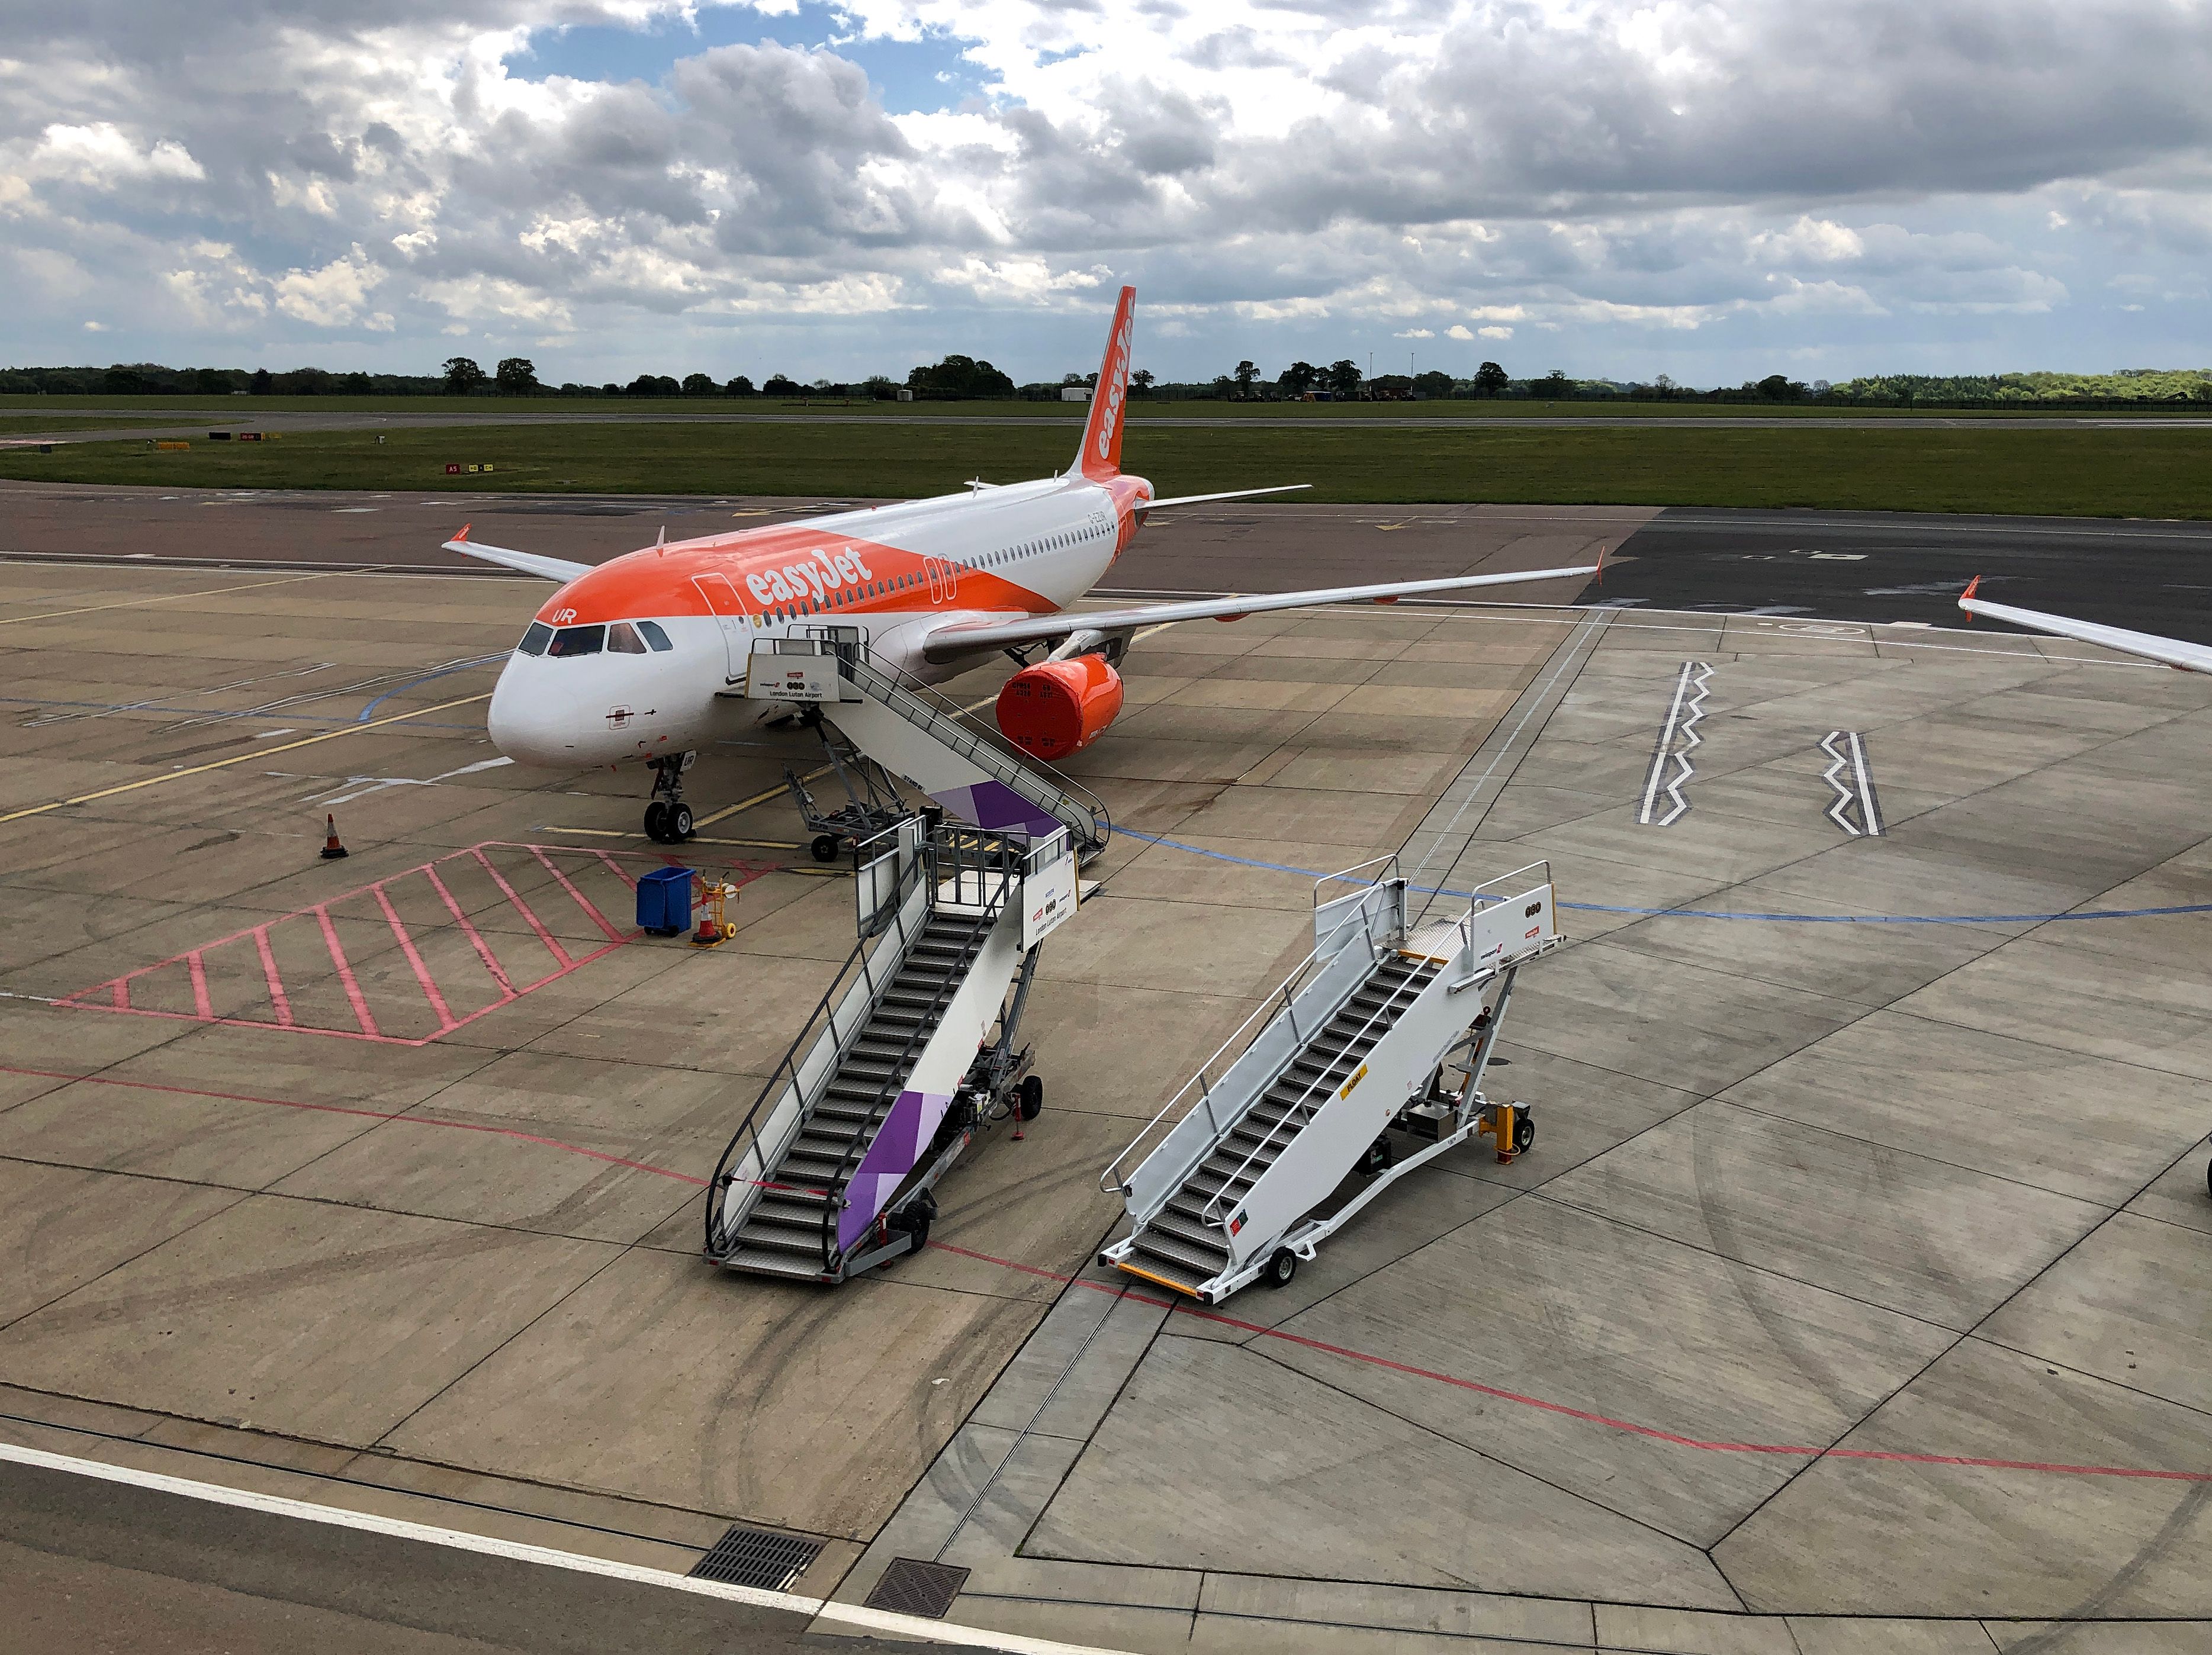 An easyJet plane is seen at London Luton Airport